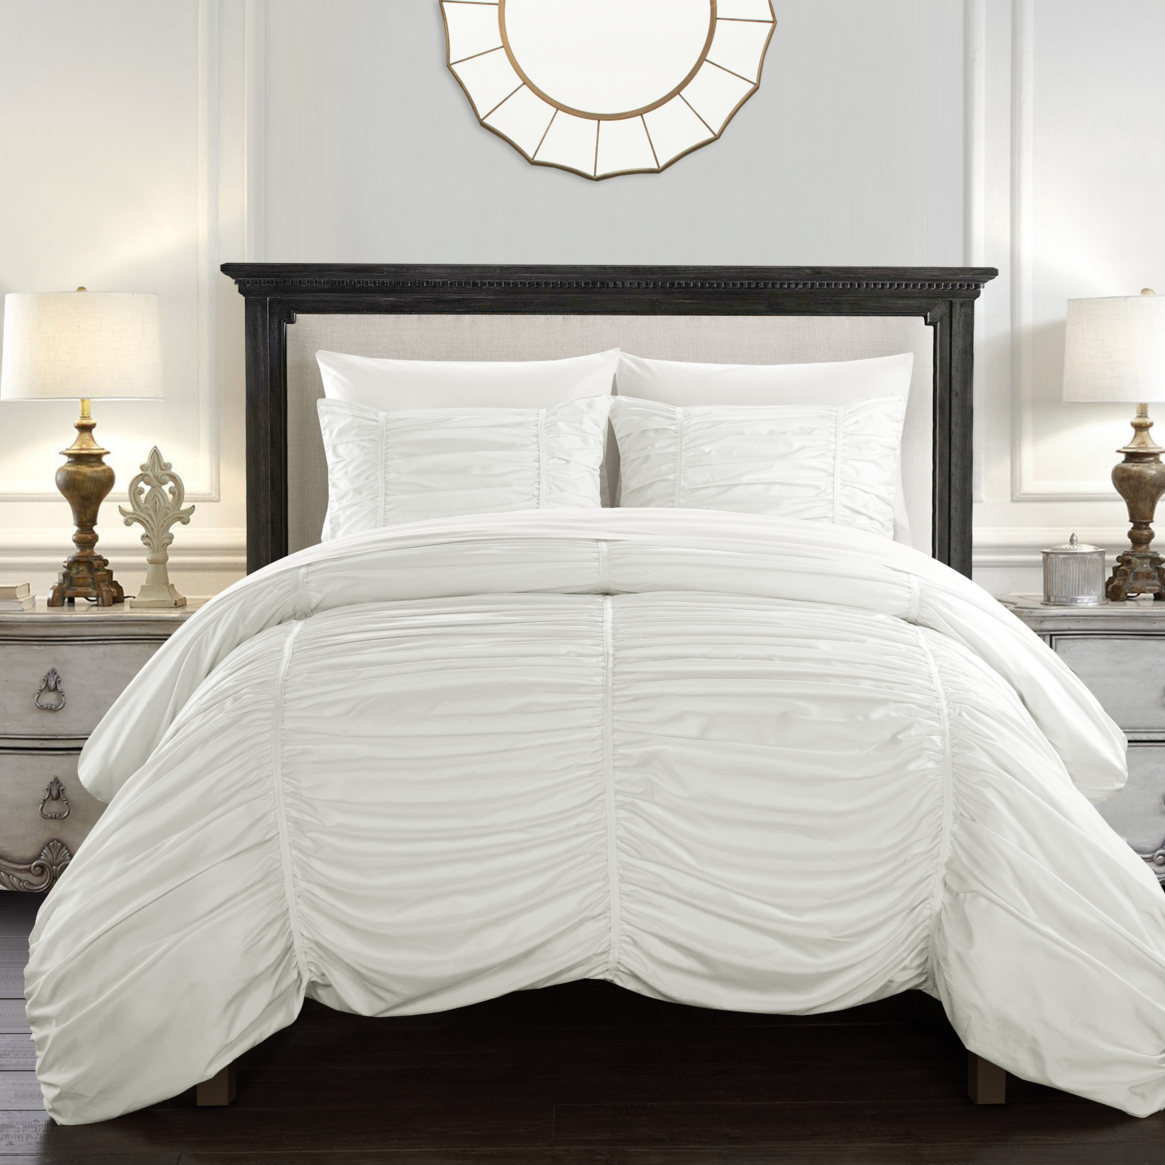 Kleia 7 Or 5 Piece Comforter Set Contemporary Striped Ruched Ruffled Design Bed In A Bag - White, Twin X-long